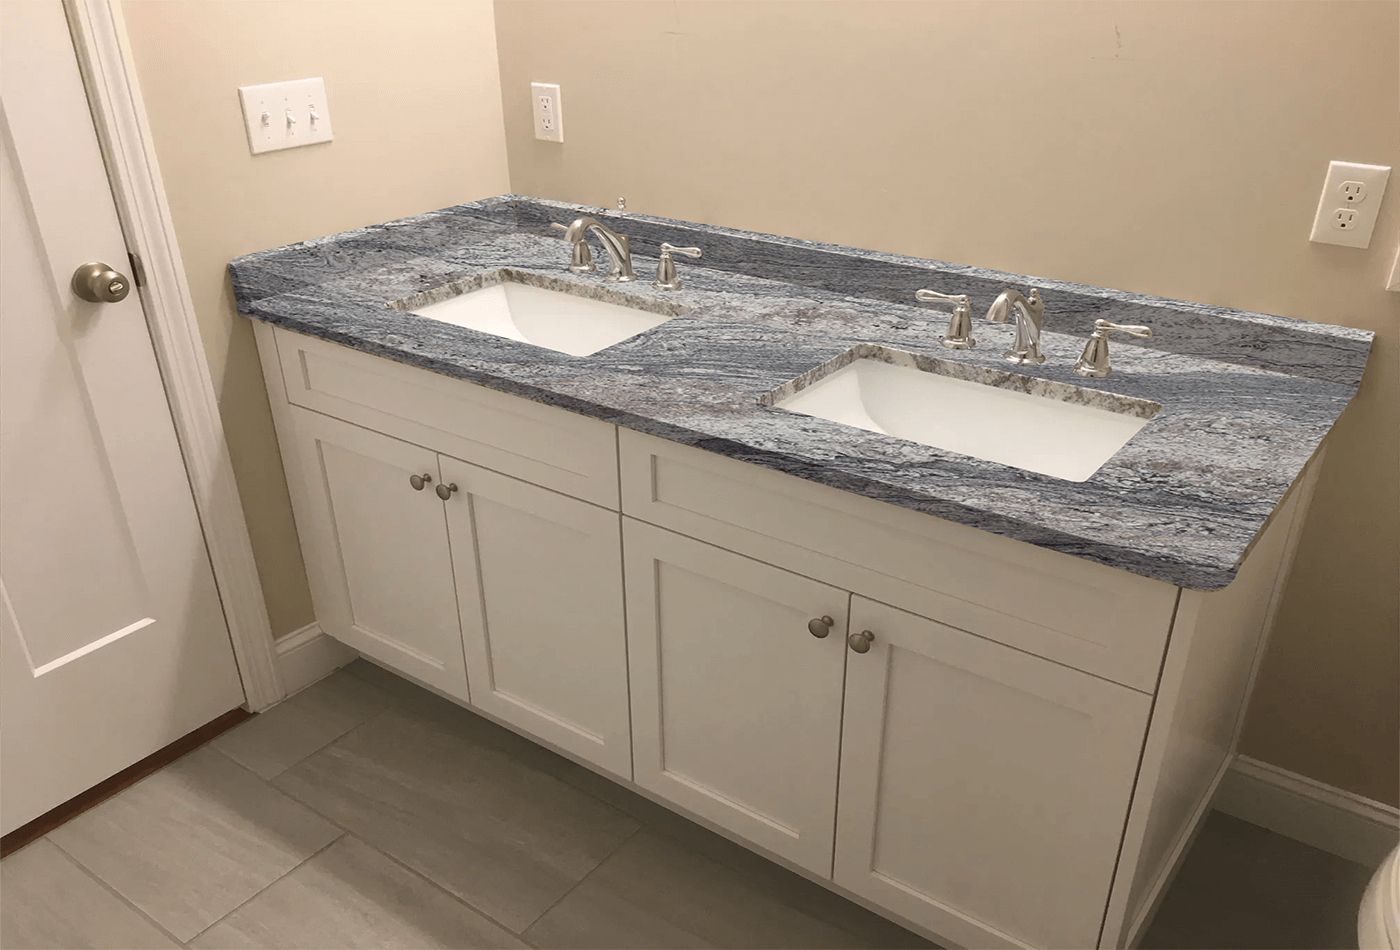 What if you have a Granite Vanitytop for your bathroom